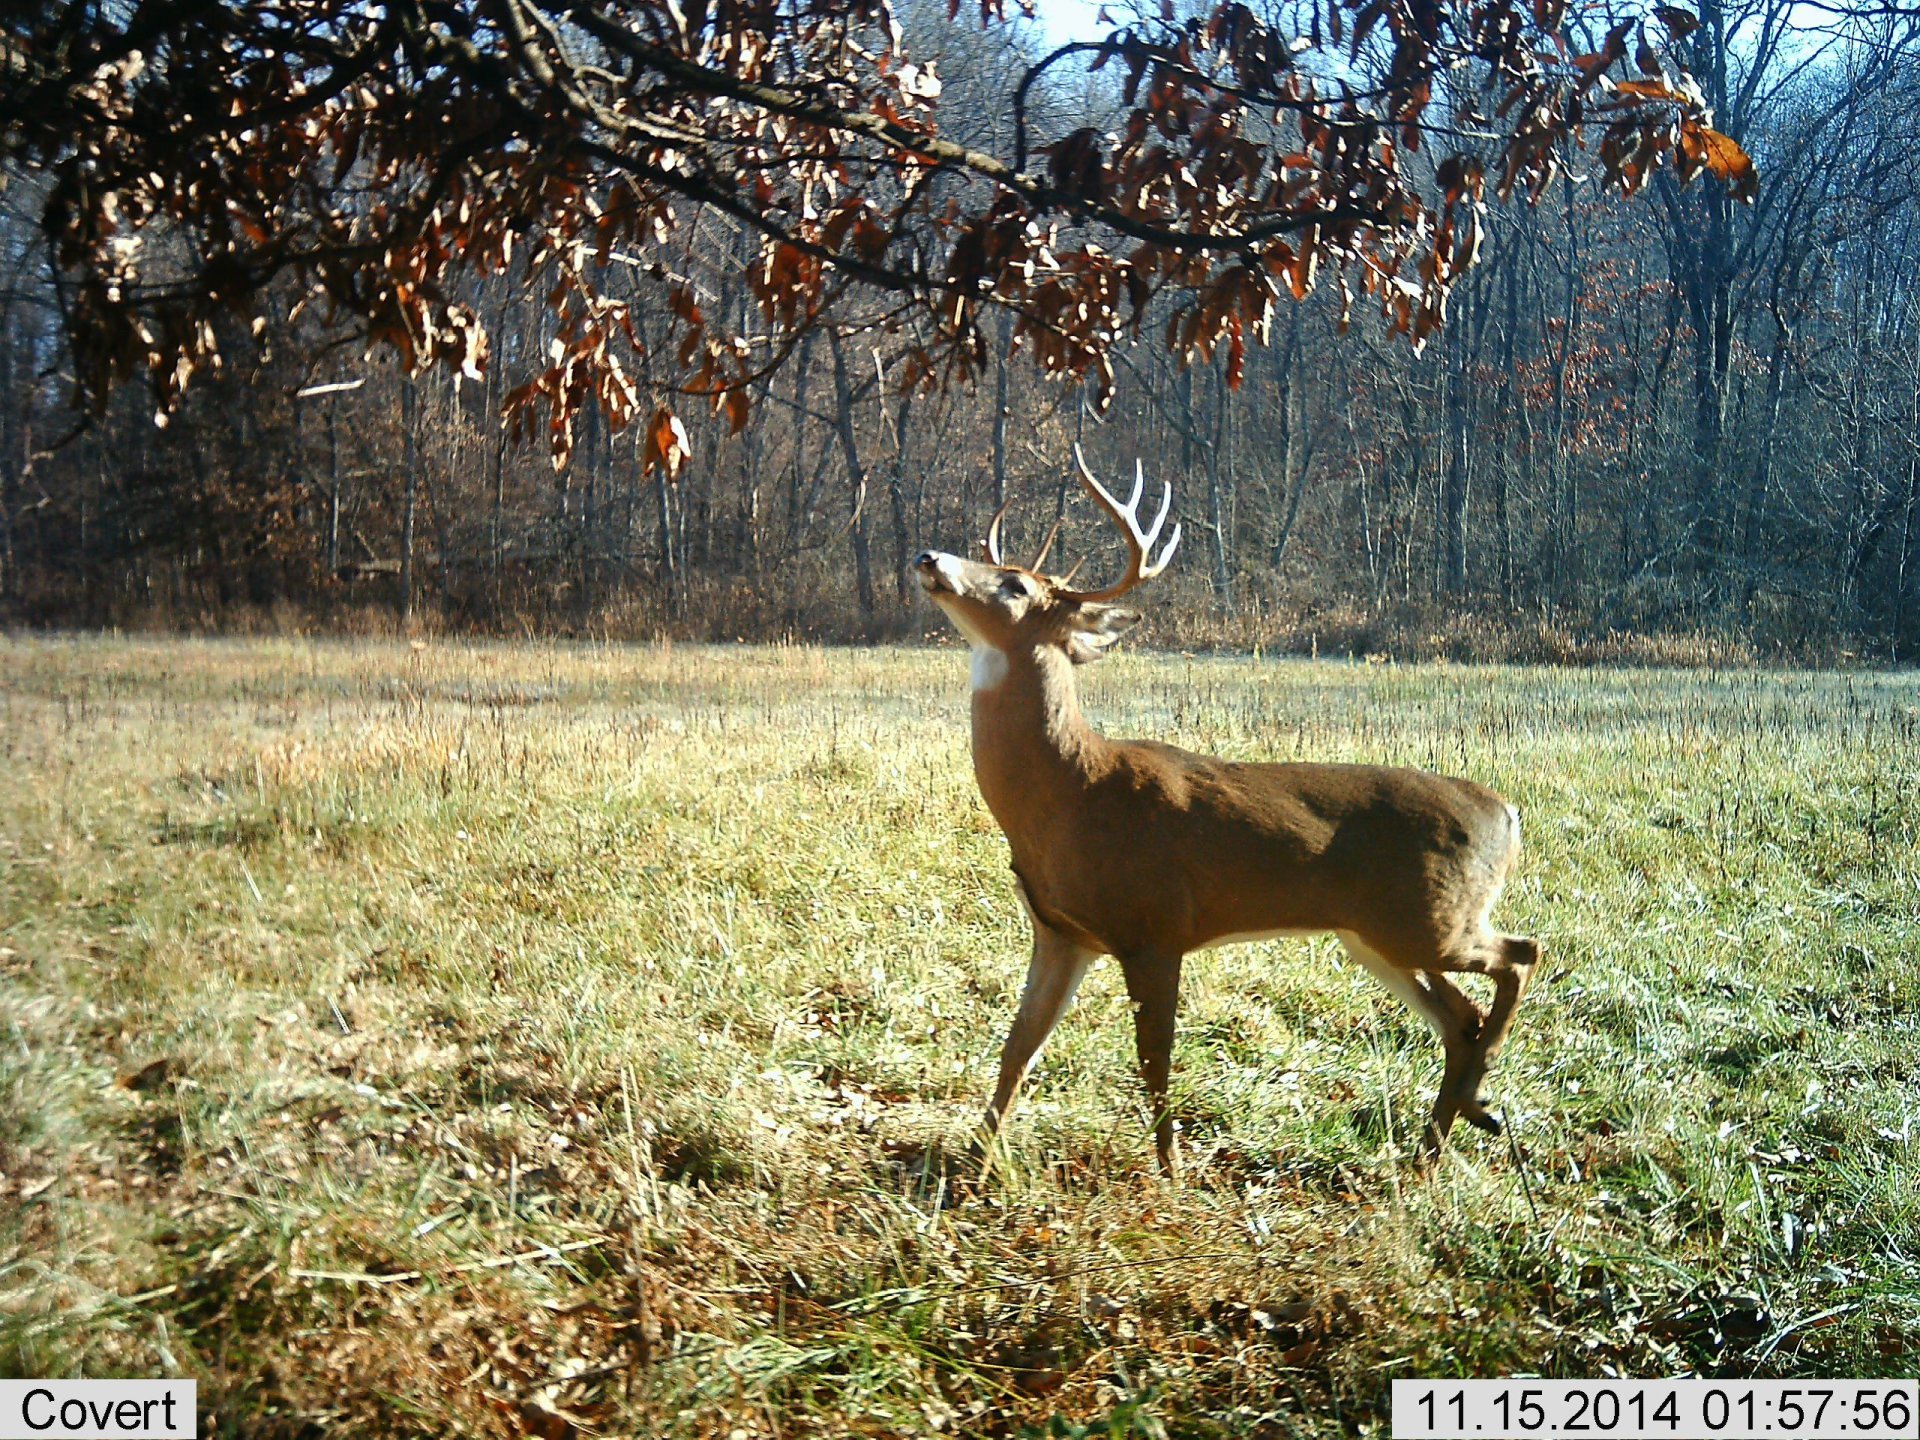 PHOTO GALLERY Ohio Whitetail Deer Hunting Outfitter